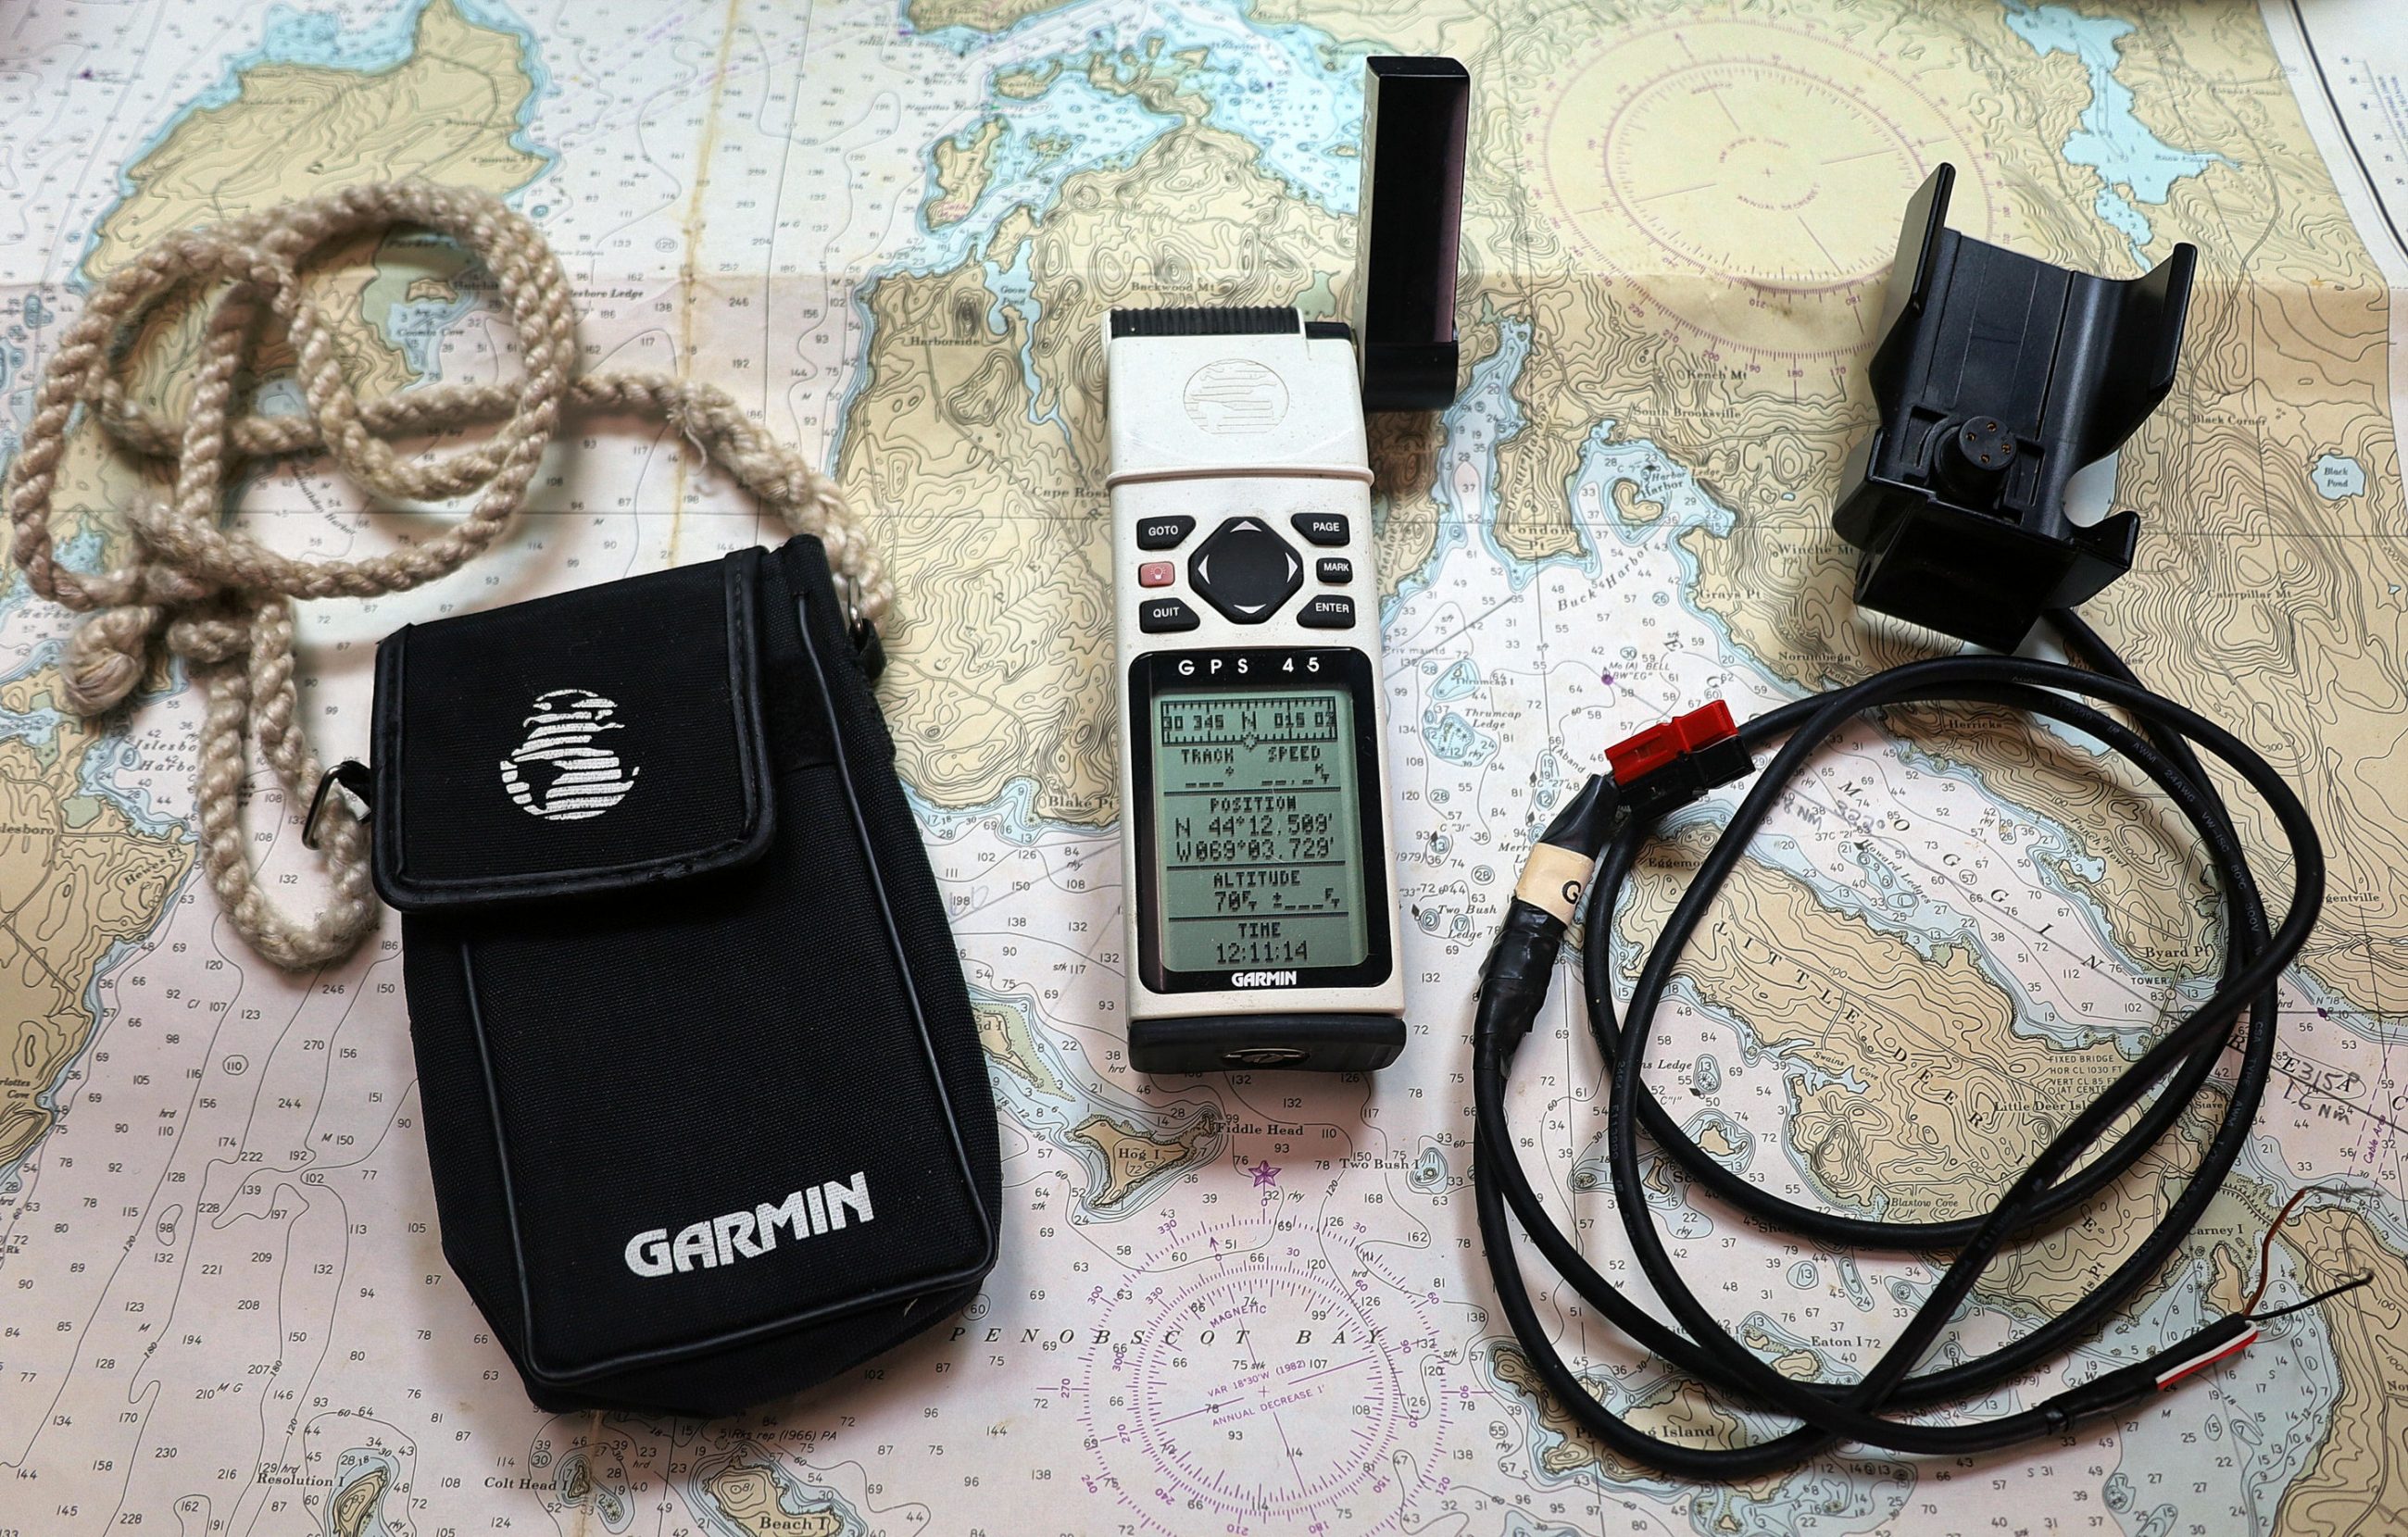 onkruid Consequent borst My Garmin GPS 45 was amazing in 1994, and it still works (mostly) - Panbo